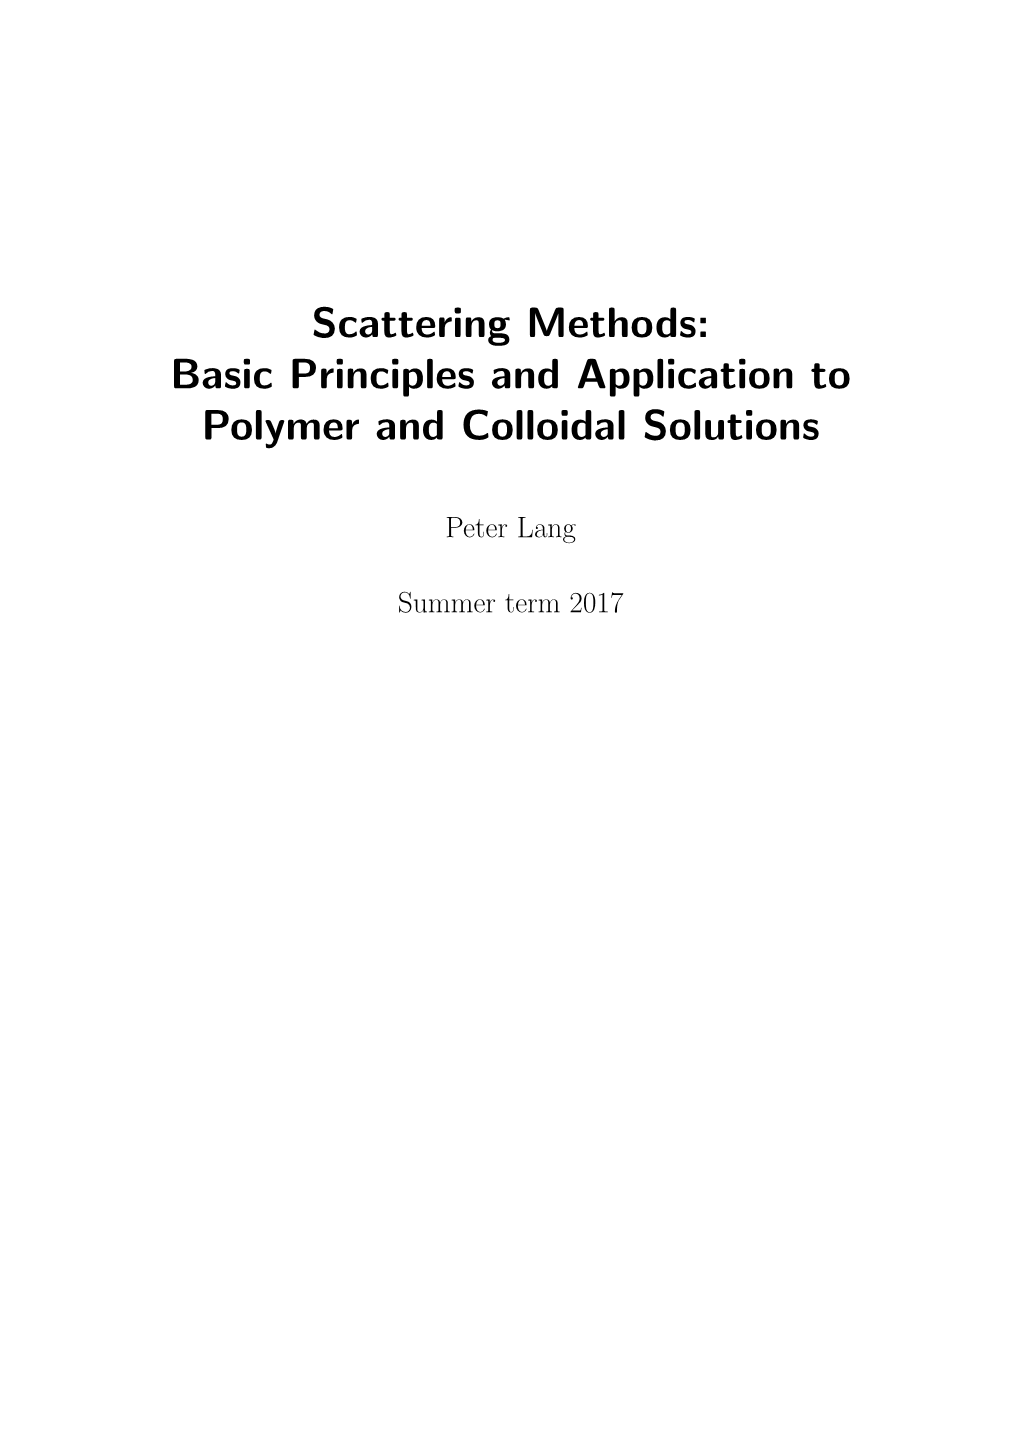 Scattering Methods: Basic Principles and Application to Polymer and Colloidal Solutions